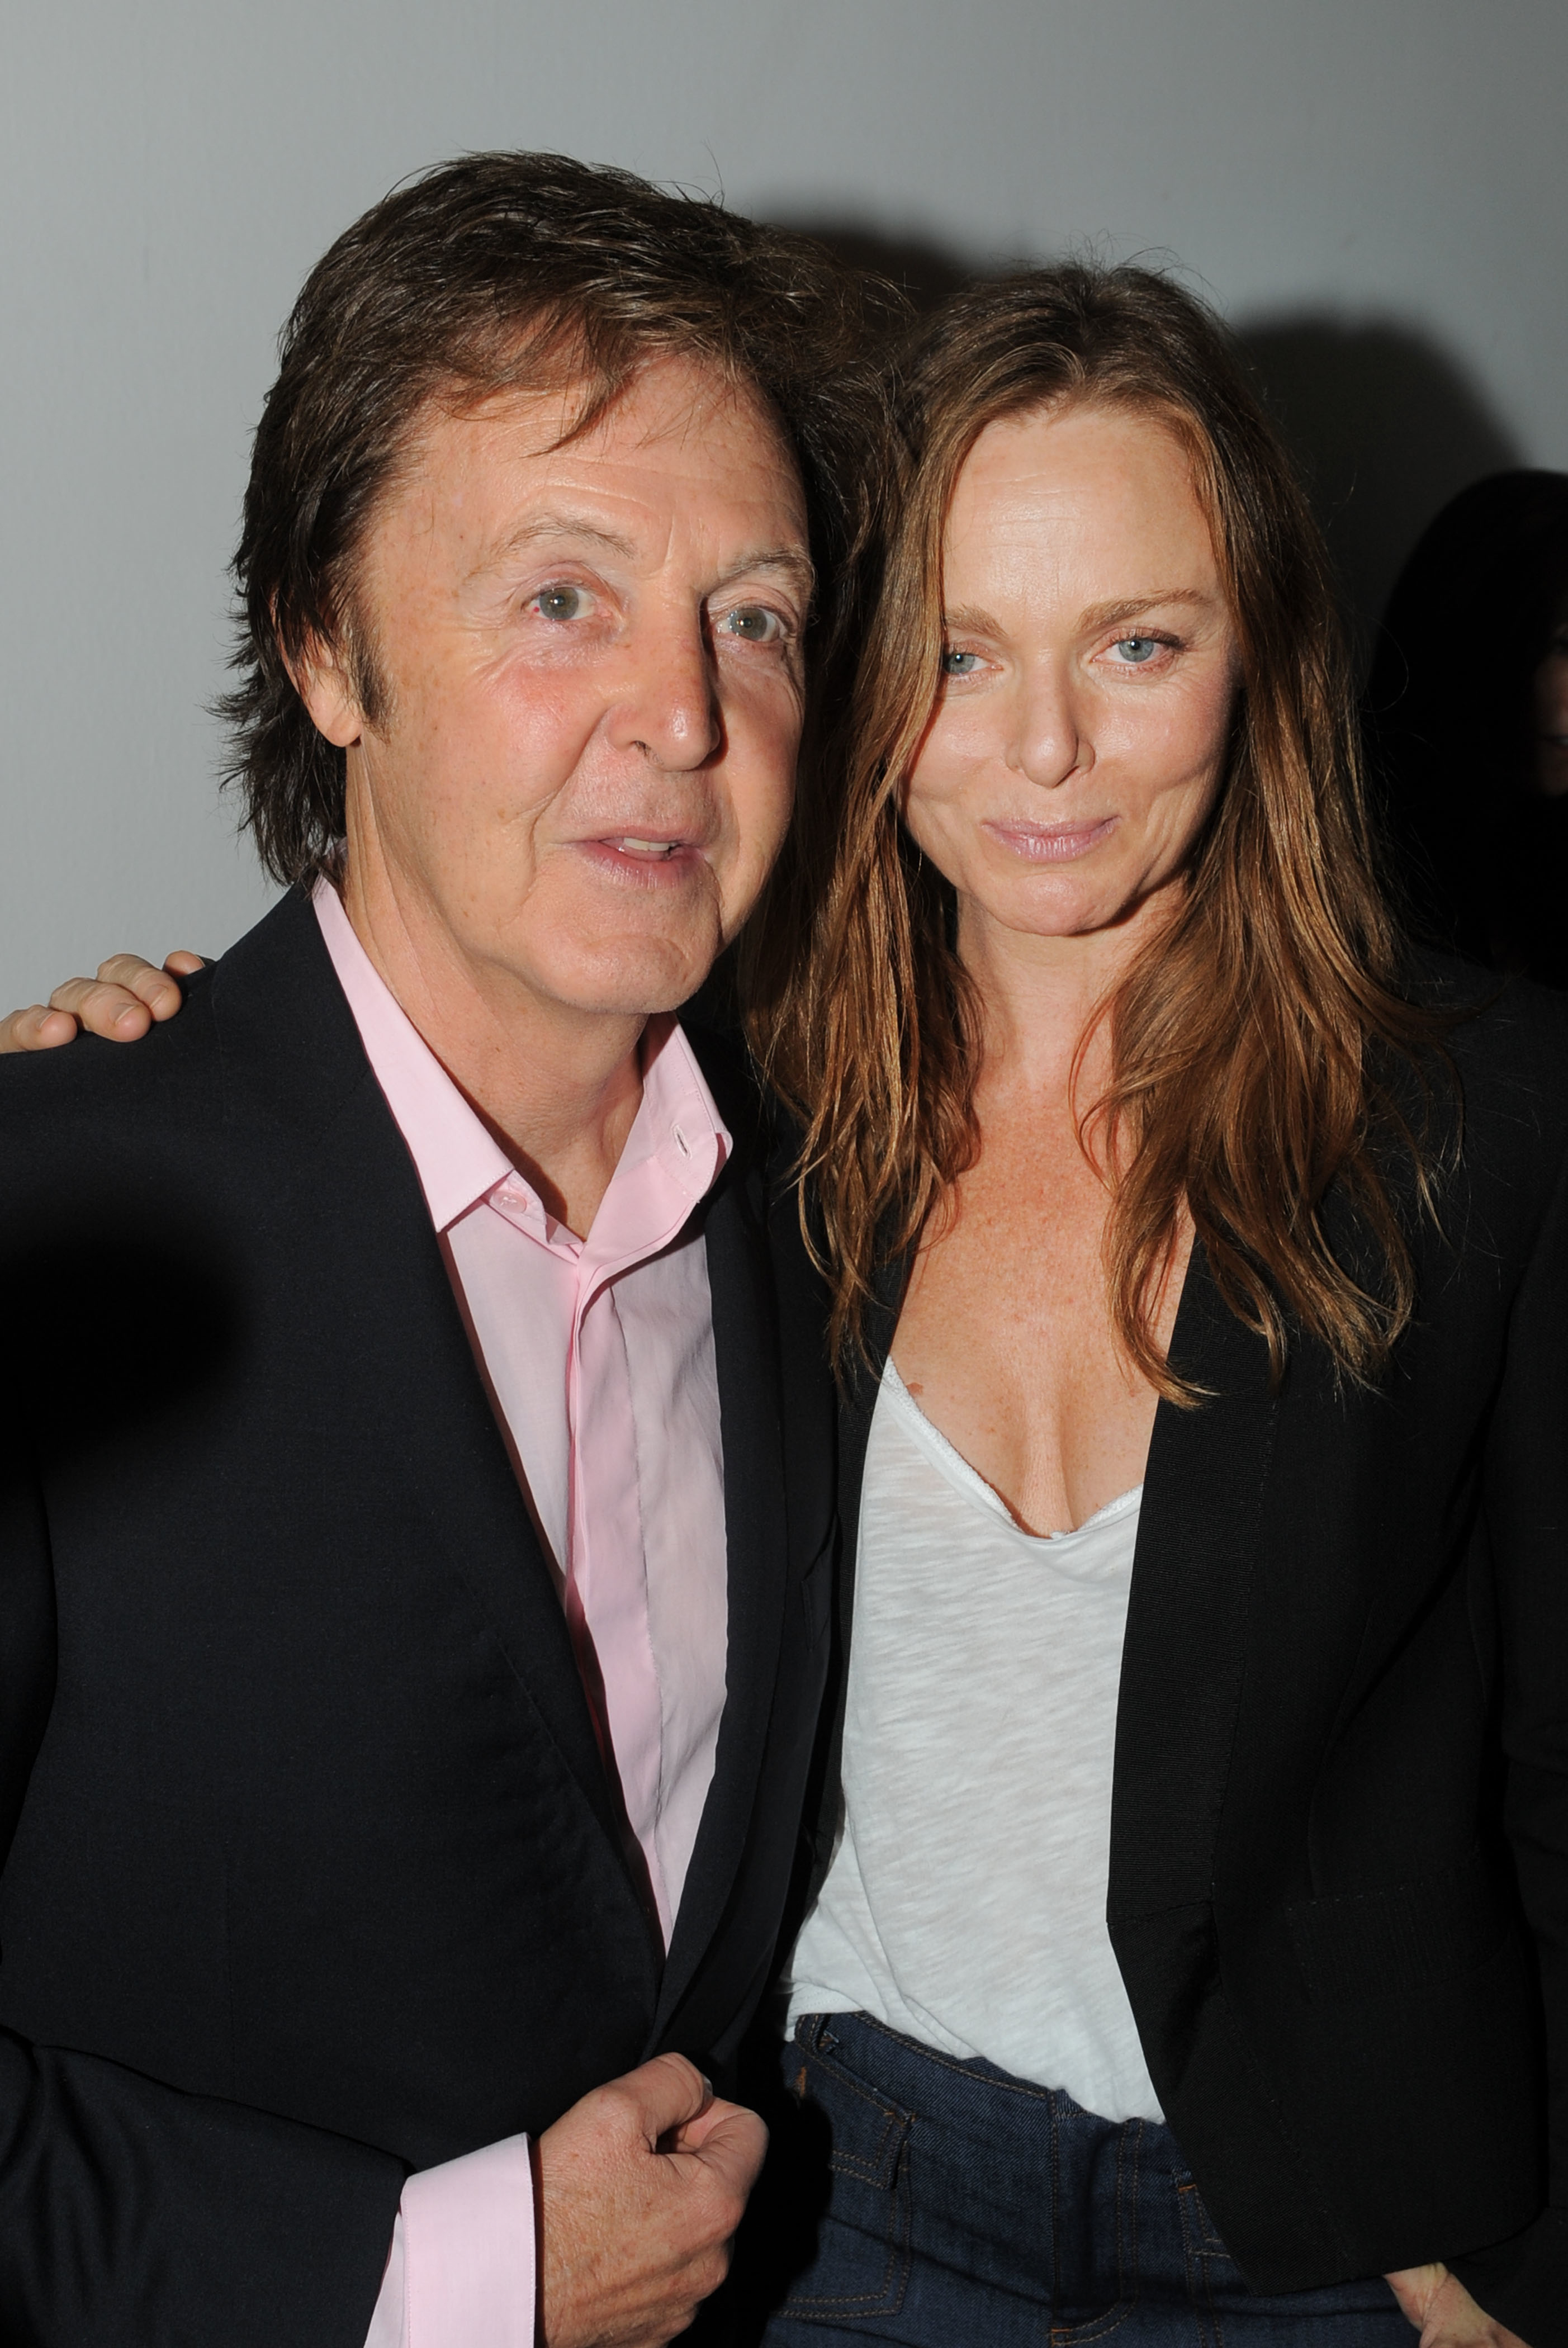 Paul McCartney with Stella McCartney at "Stella McCartney" ready-to-wear Spring/Summer 2010 collection during Paris Fashion Week, on October 5, 2009. | Source: Getty Images